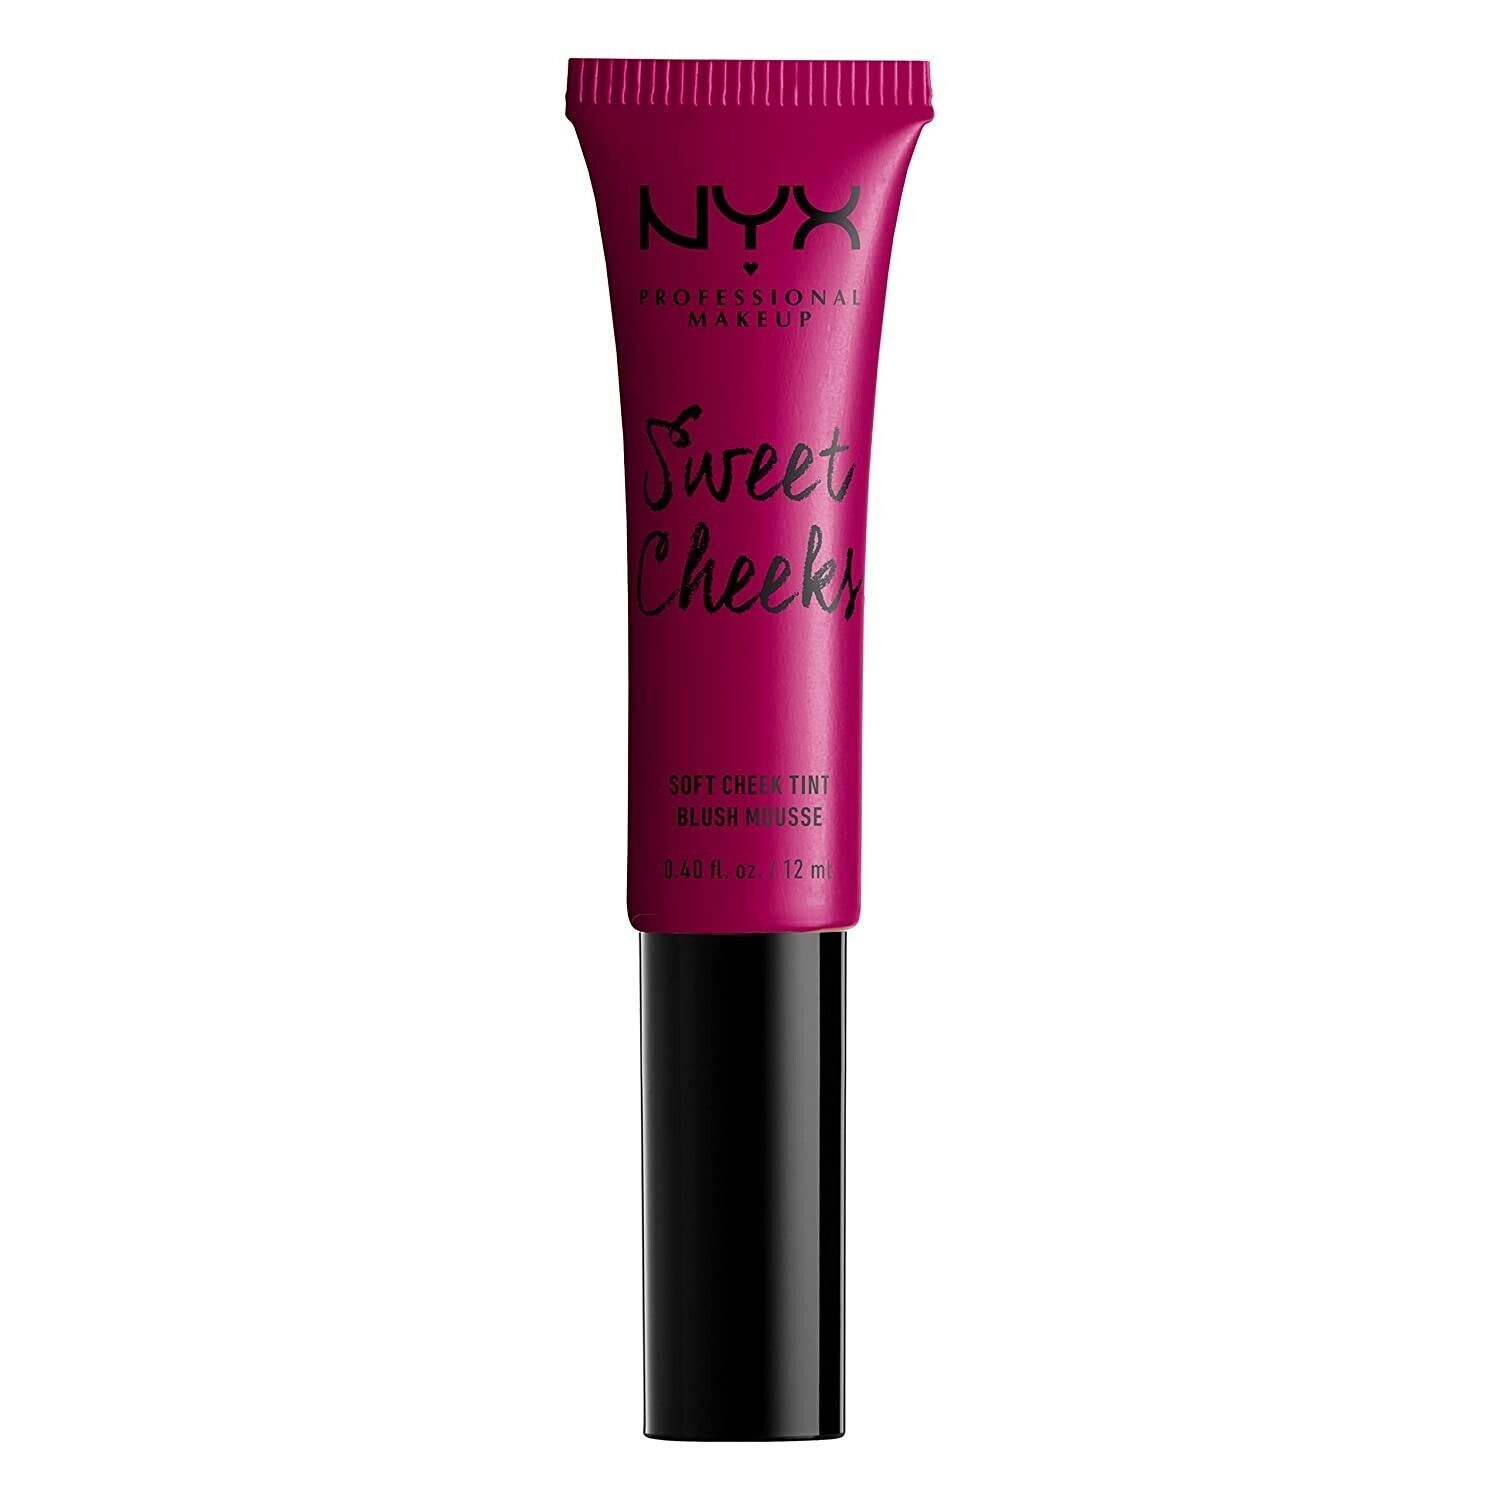 Primary image for NYX Professional Makeup Sweet Cheeks Soft Cheek Tint - Showgirl - 0.4oz SCSCT05